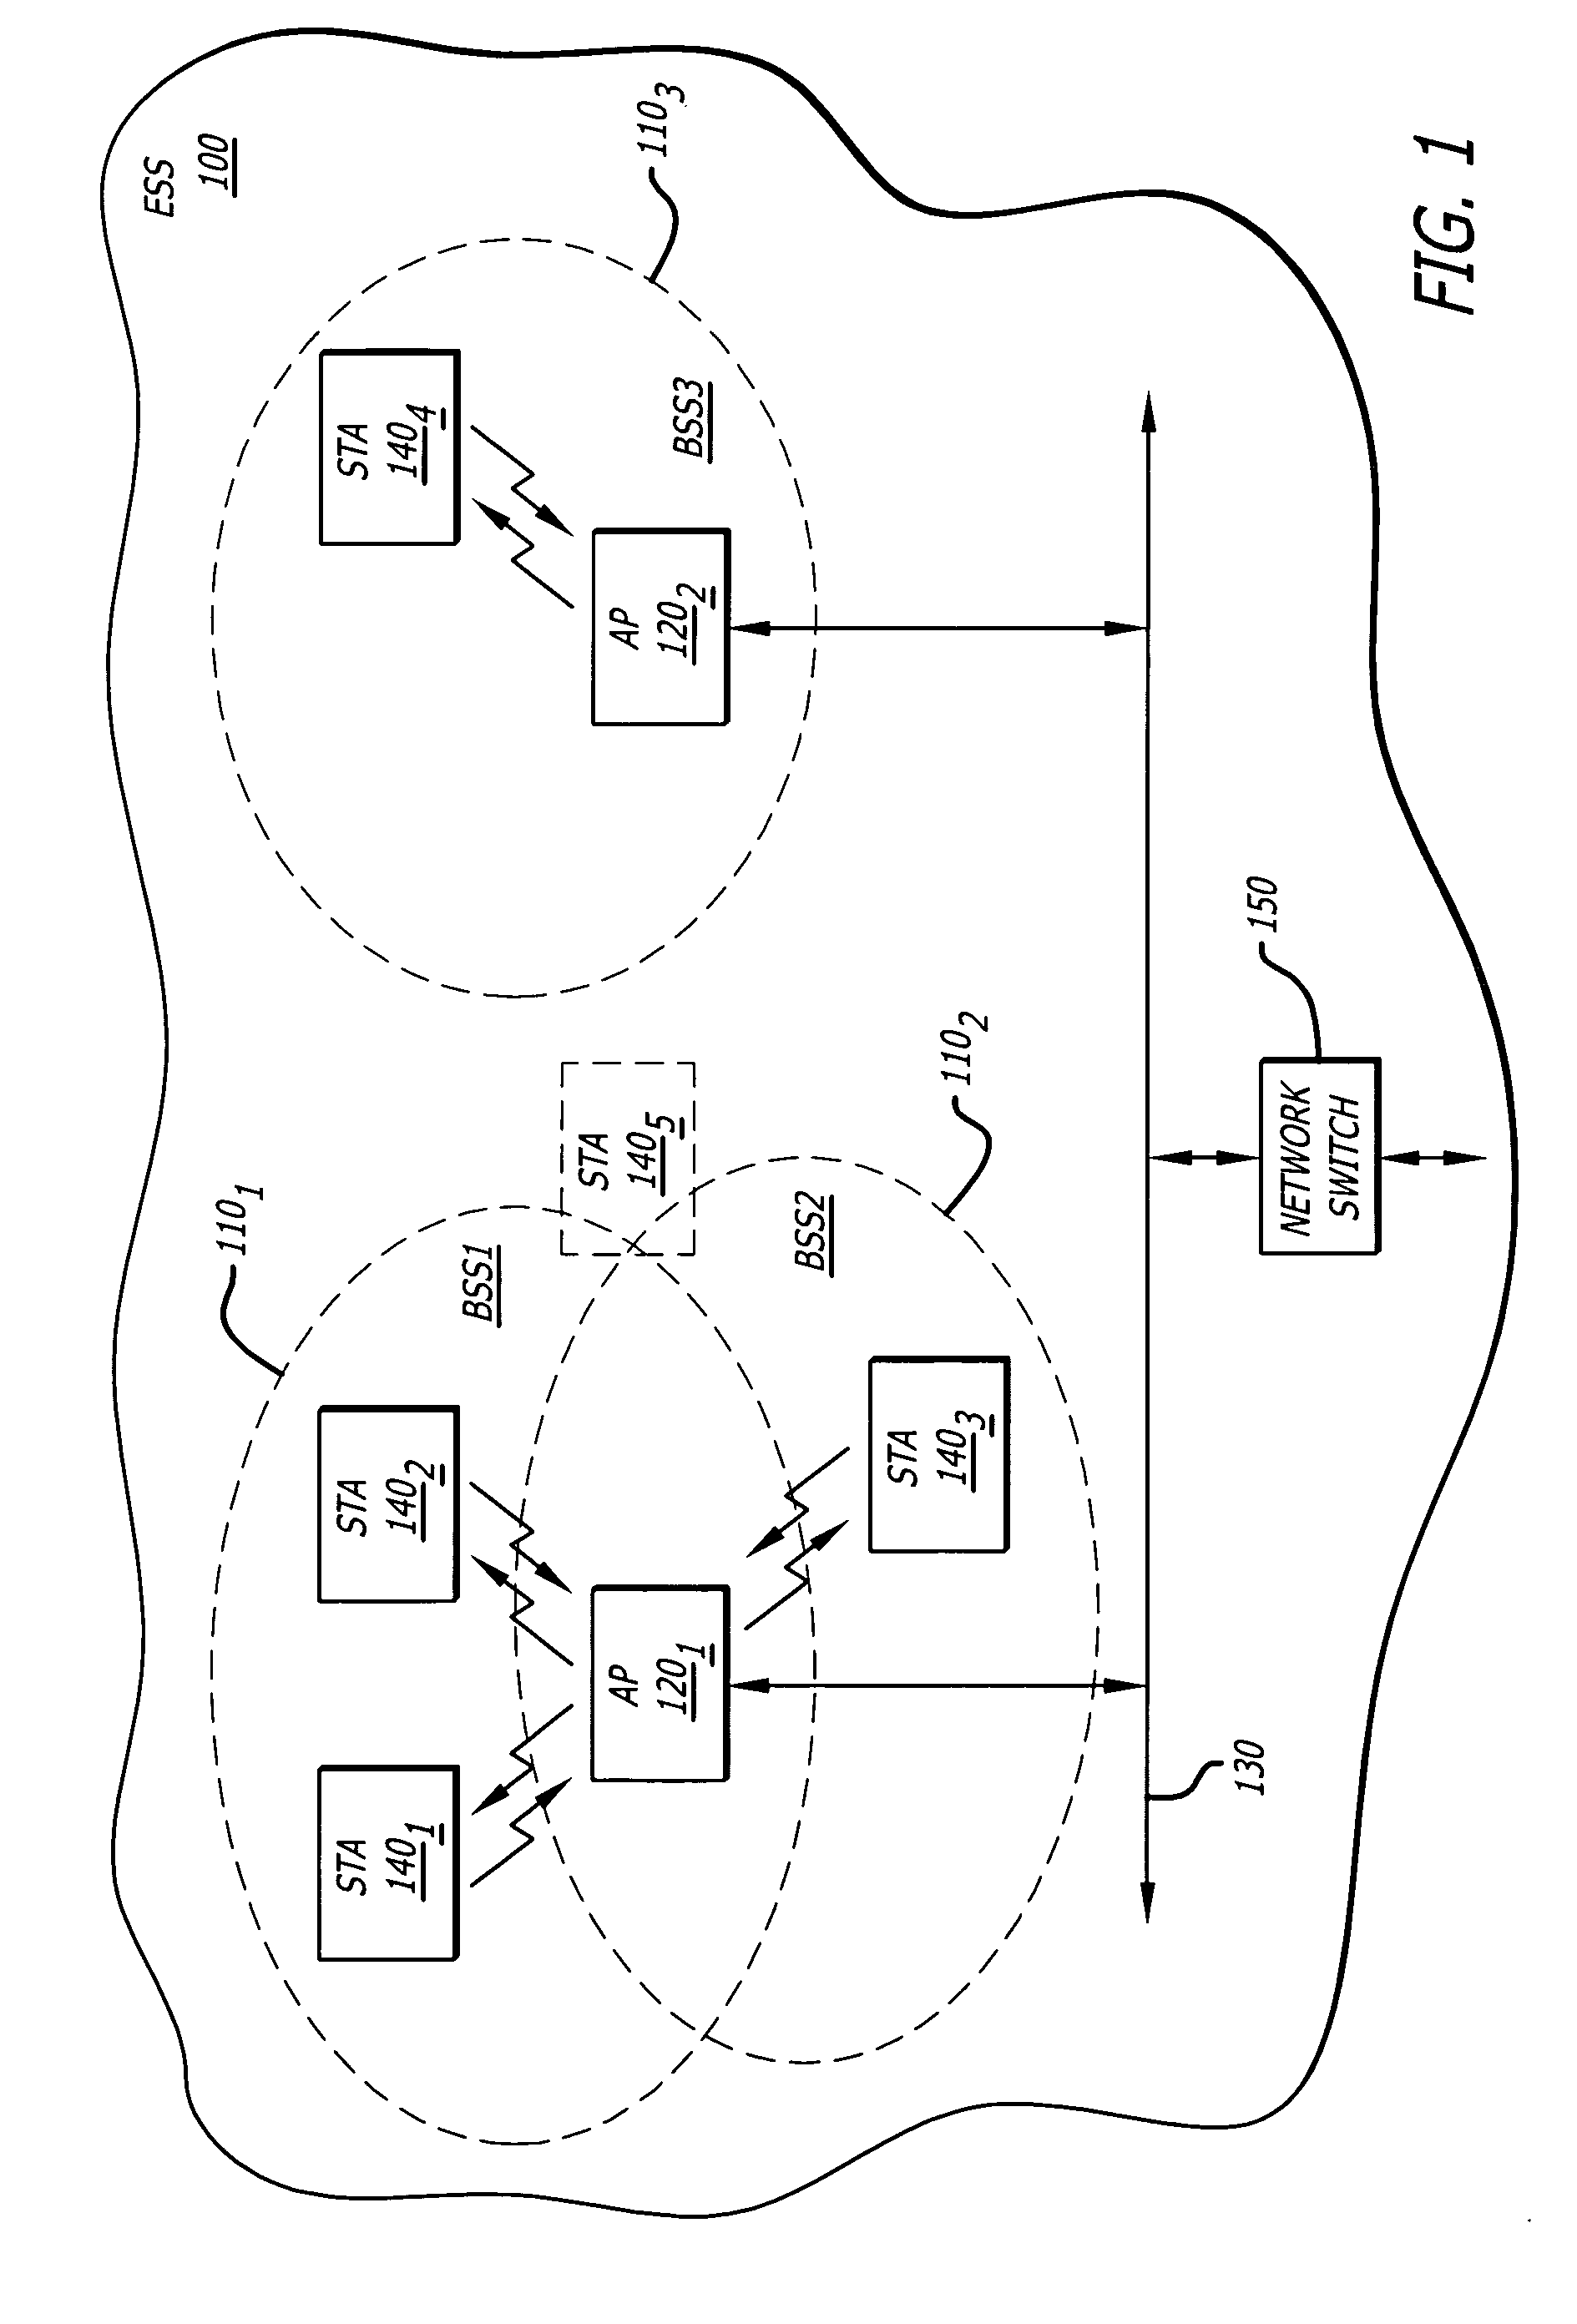 System and method for advertising the same service set identifier for different basic service sets